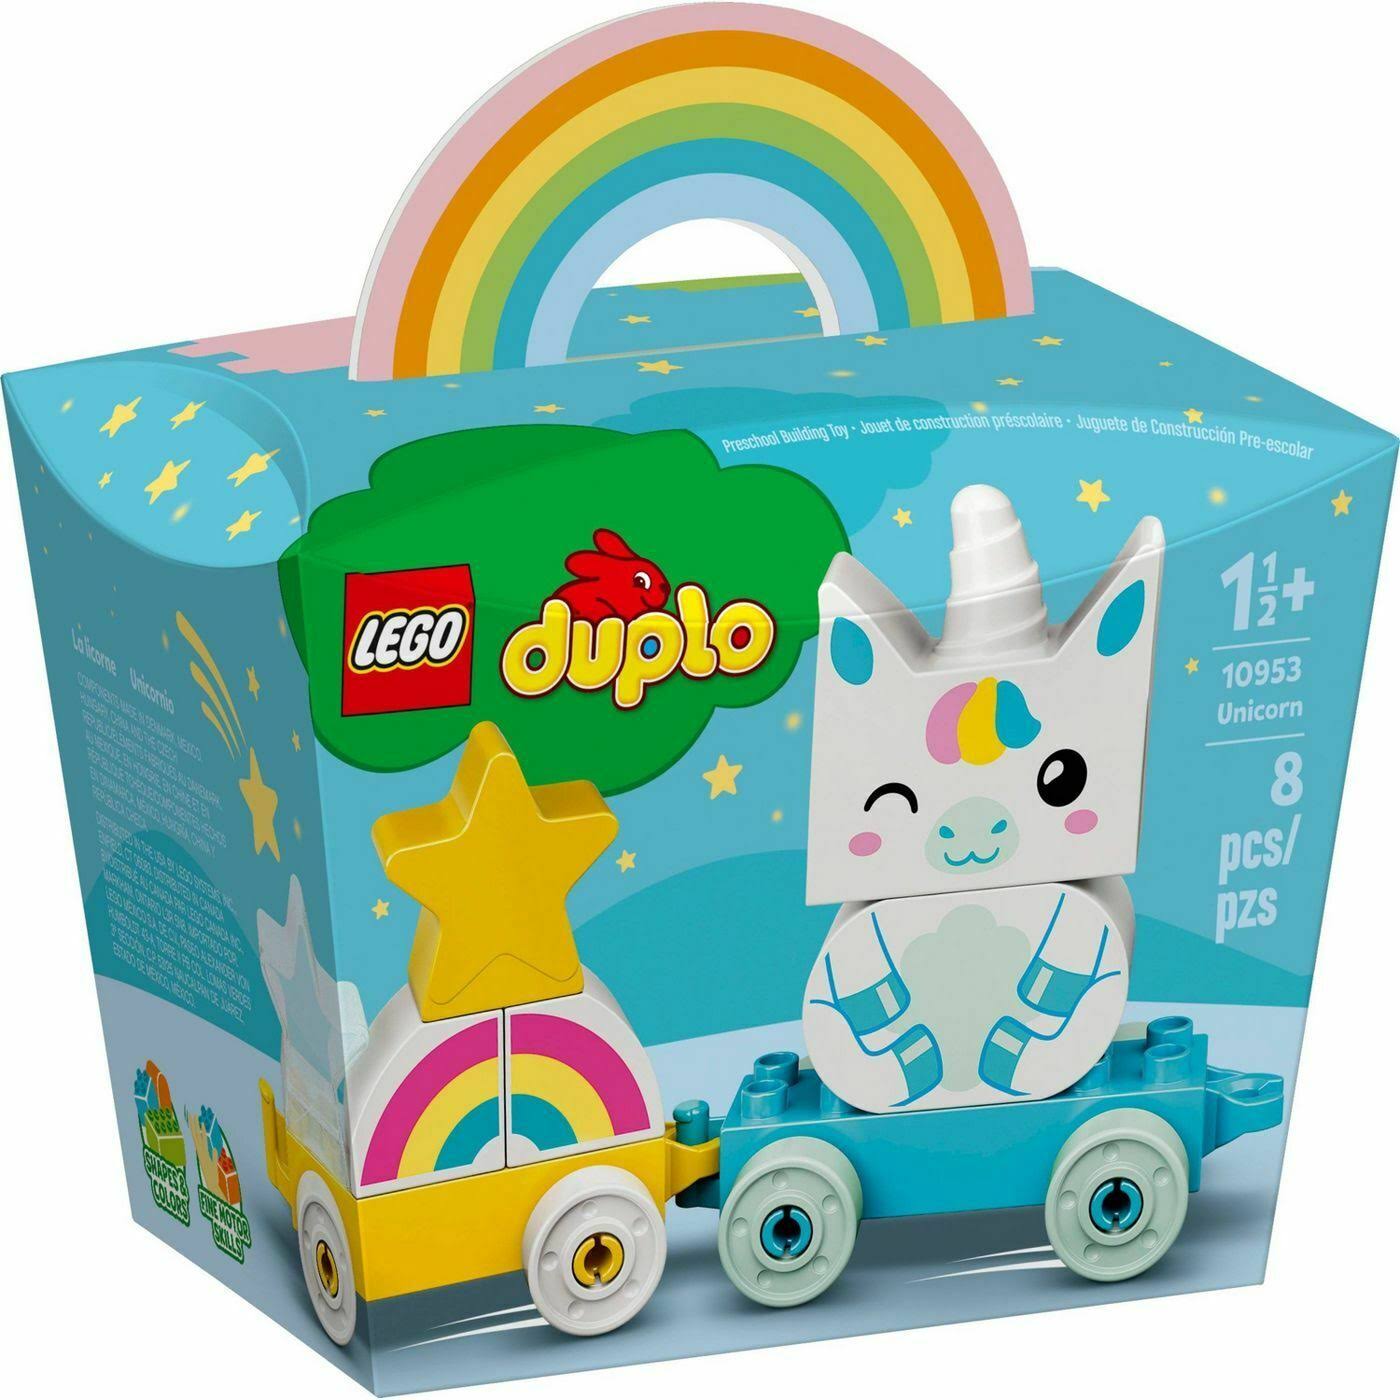 Lego 10953 DUPLO My First Unicorn Pull-Along New with Sealed Box